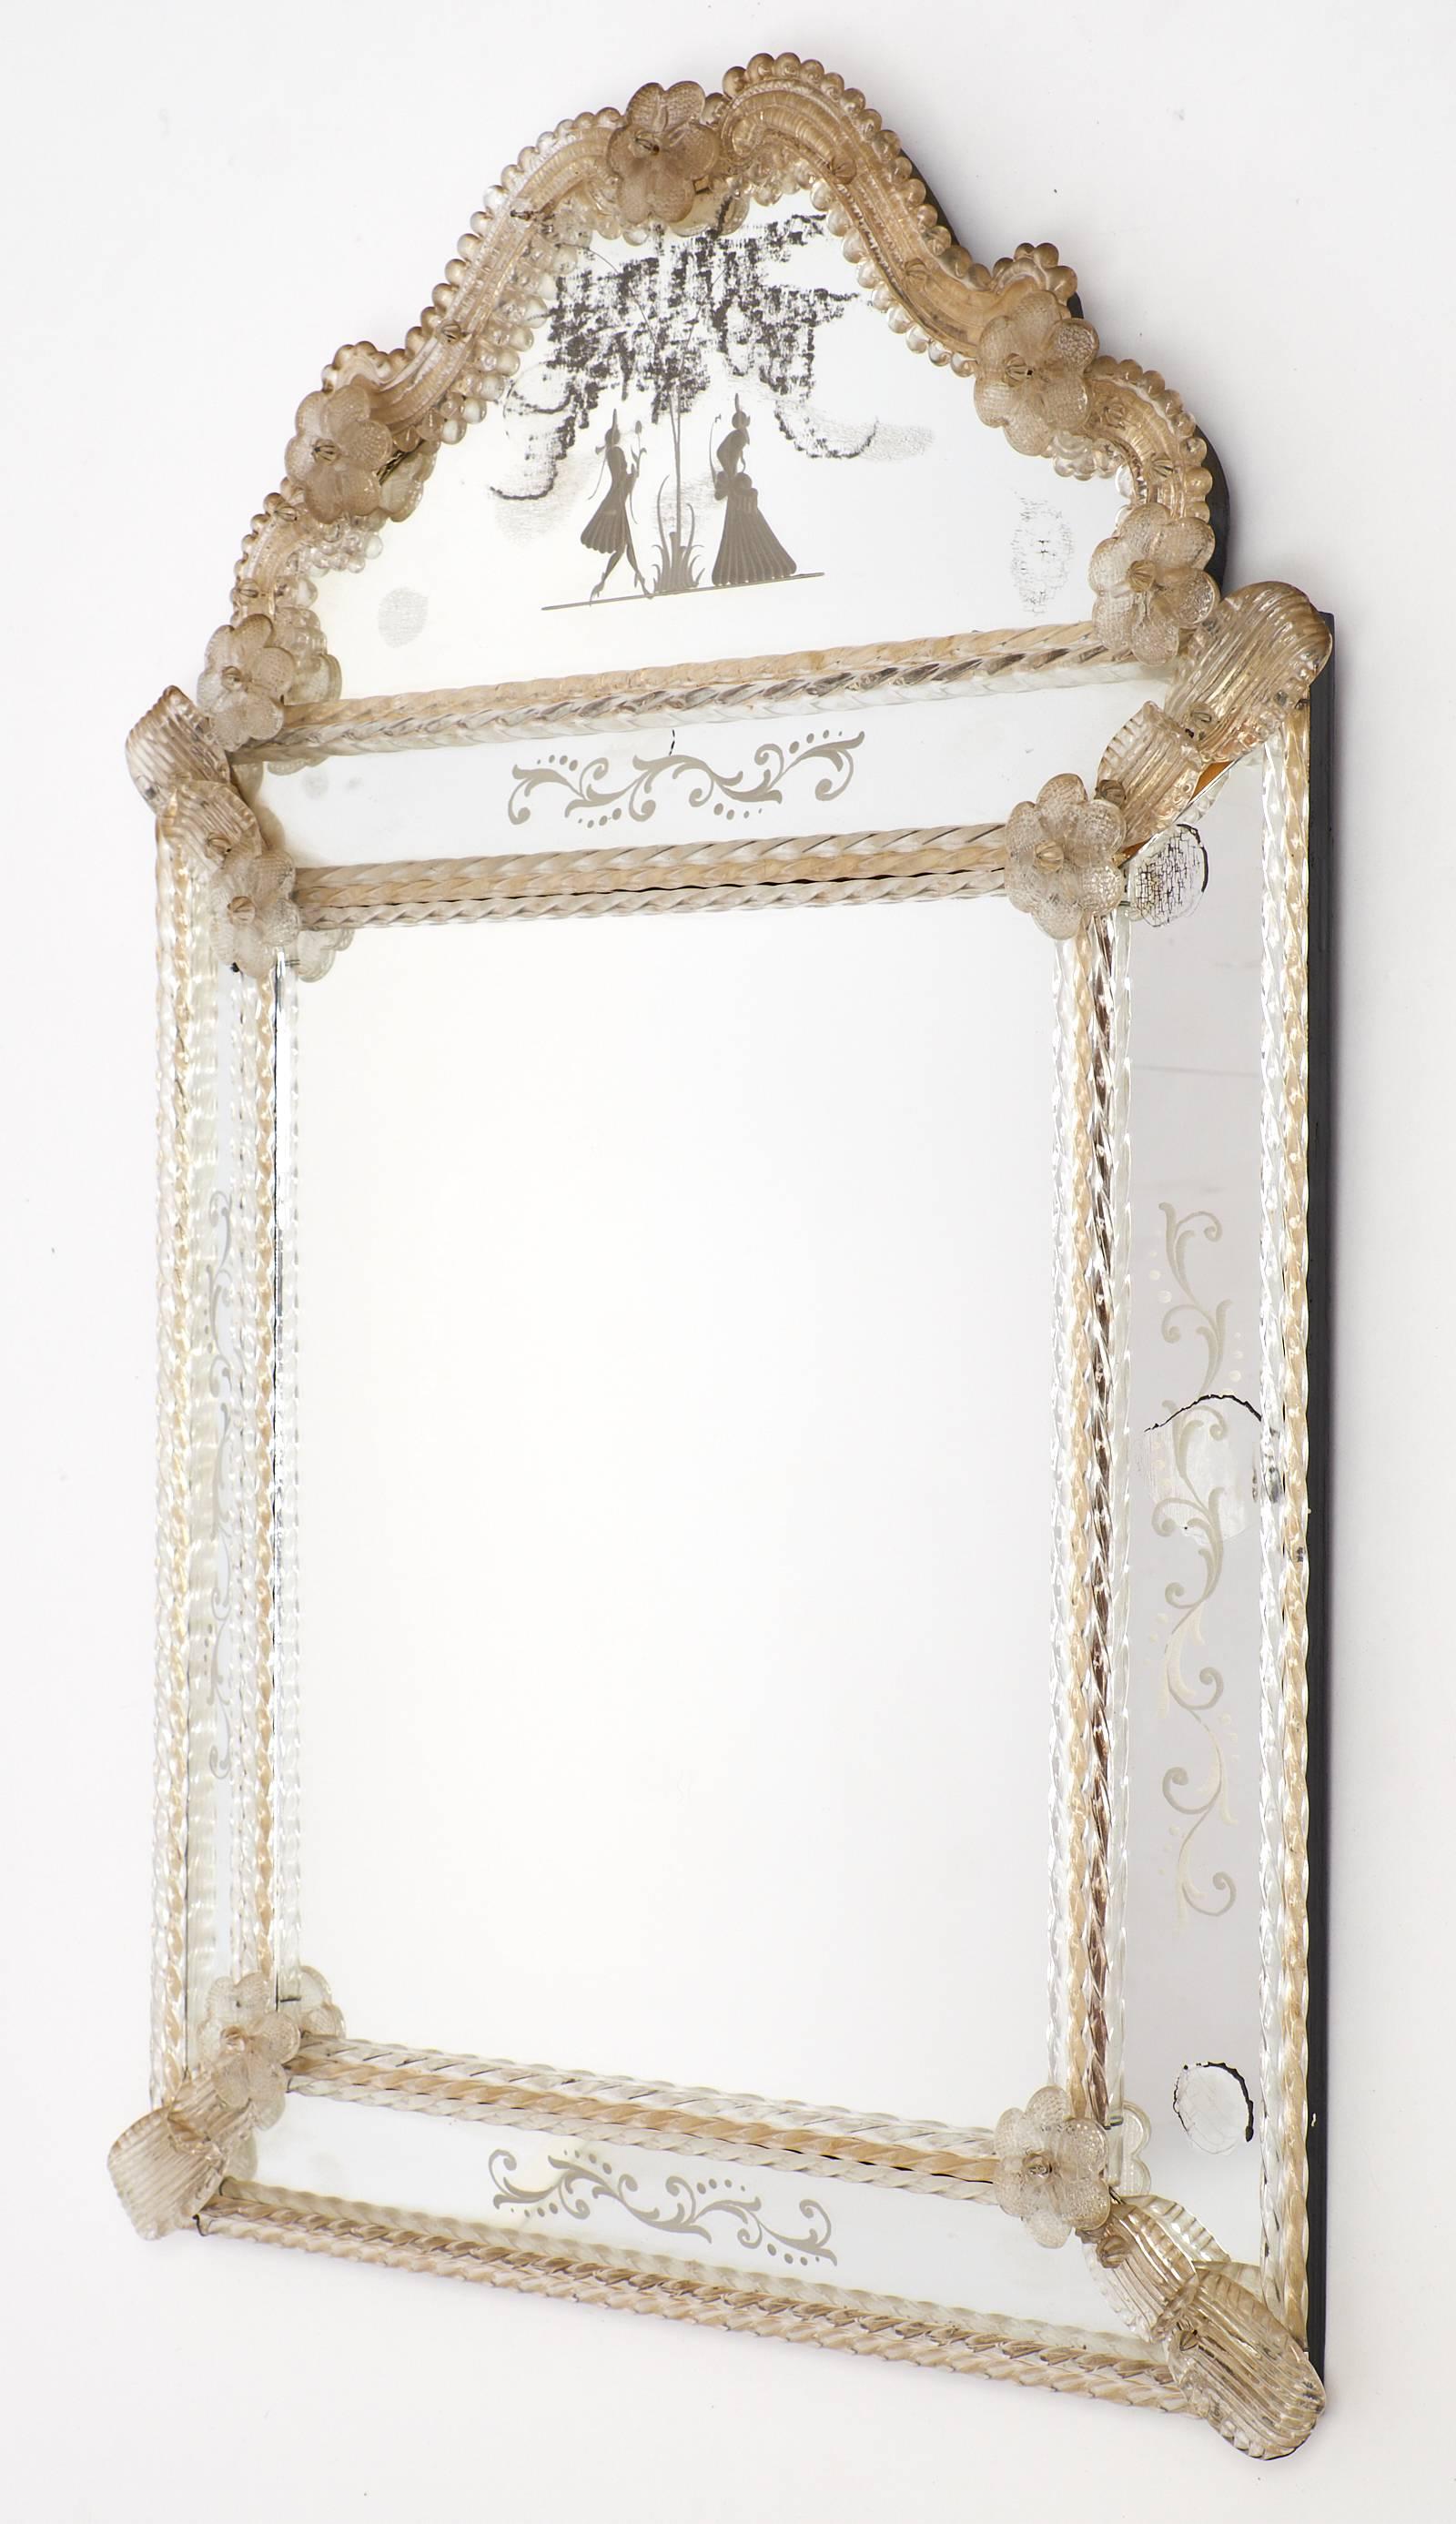 Venetian glass wall mirror with a rectangular central mirror and fronton, smoked glass elements throughout , floral elements, torsadoes. Engraved romantic scene, floral friezes on the mirrored frame. Beautiful condition.